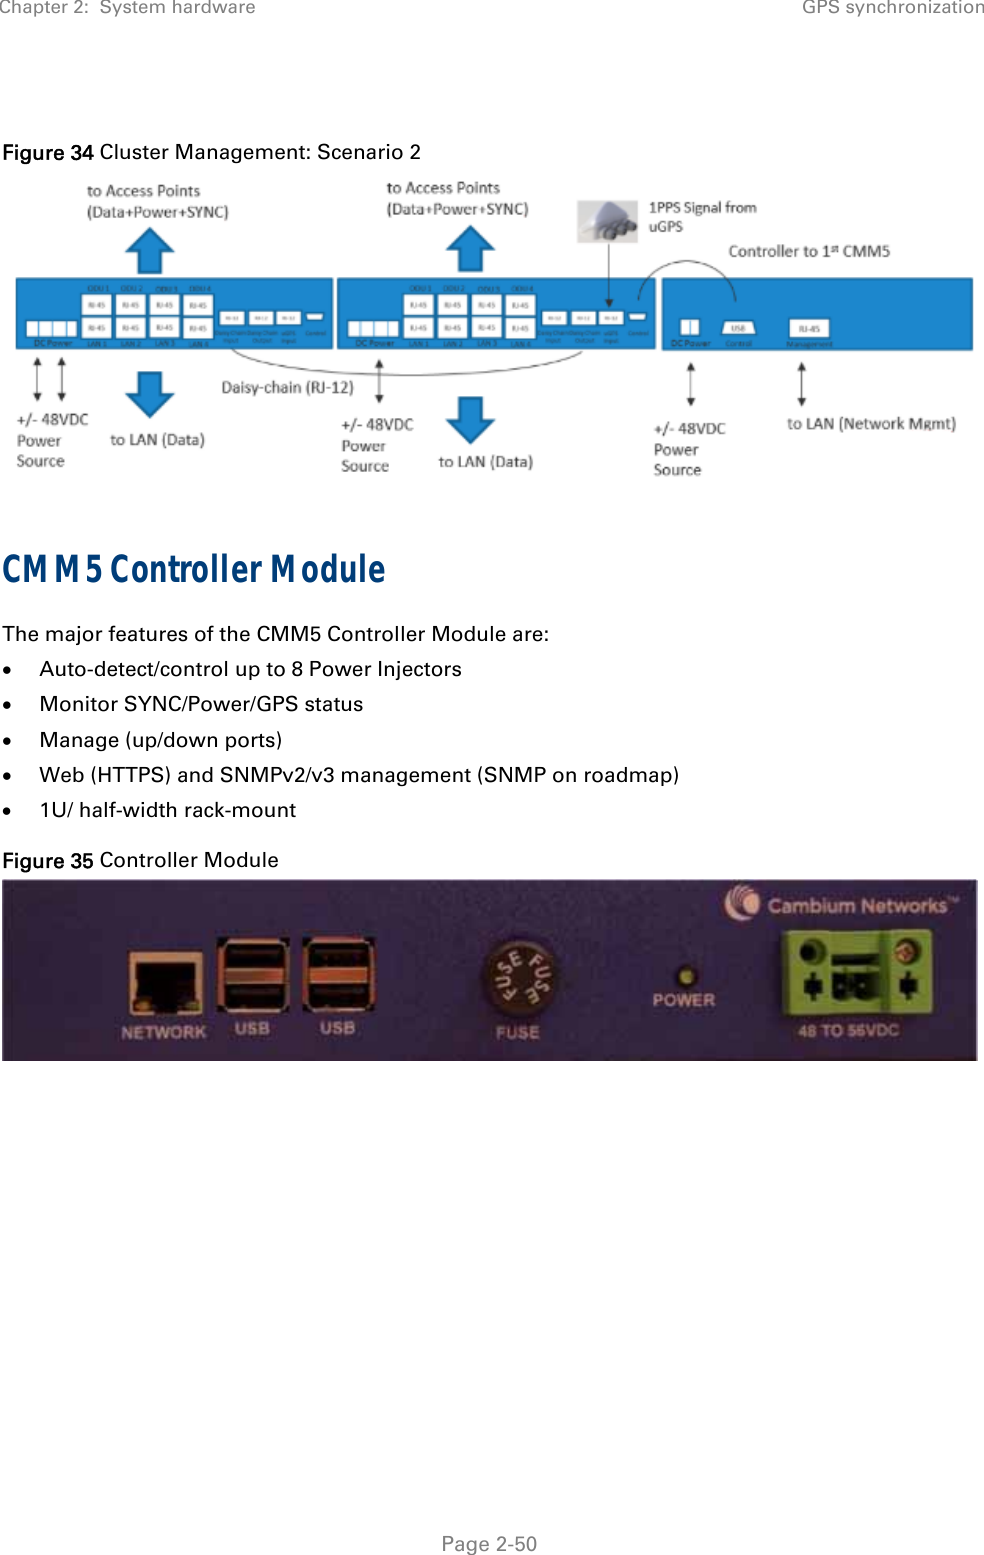 Chapter 2:  System hardware GPS synchronization   Page 2-50  Figure 34 Cluster Management: Scenario 2  CMM5 Controller Module The major features of the CMM5 Controller Module are:  Auto-detect/control up to 8 Power Injectors  Monitor SYNC/Power/GPS status  Manage (up/down ports)  Web (HTTPS) and SNMPv2/v3 management (SNMP on roadmap)  1U/ half-width rack-mount Figure 35 Controller Module    